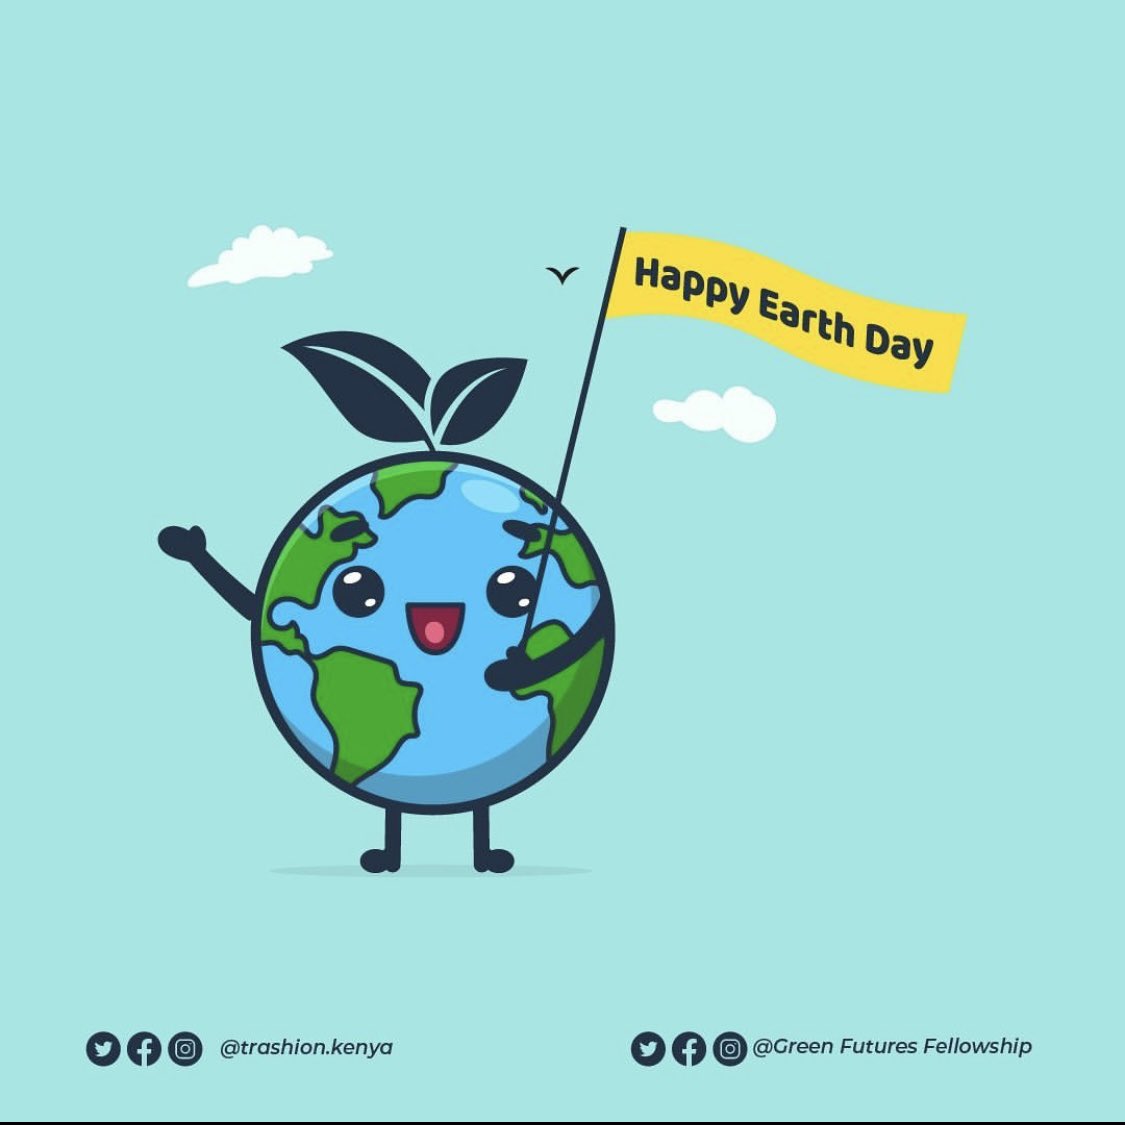 Let’s not just celebrate Earth Day once a year. Let's make every day Earth Day by taking real action to protect our planet. Happy #EarthDay2024